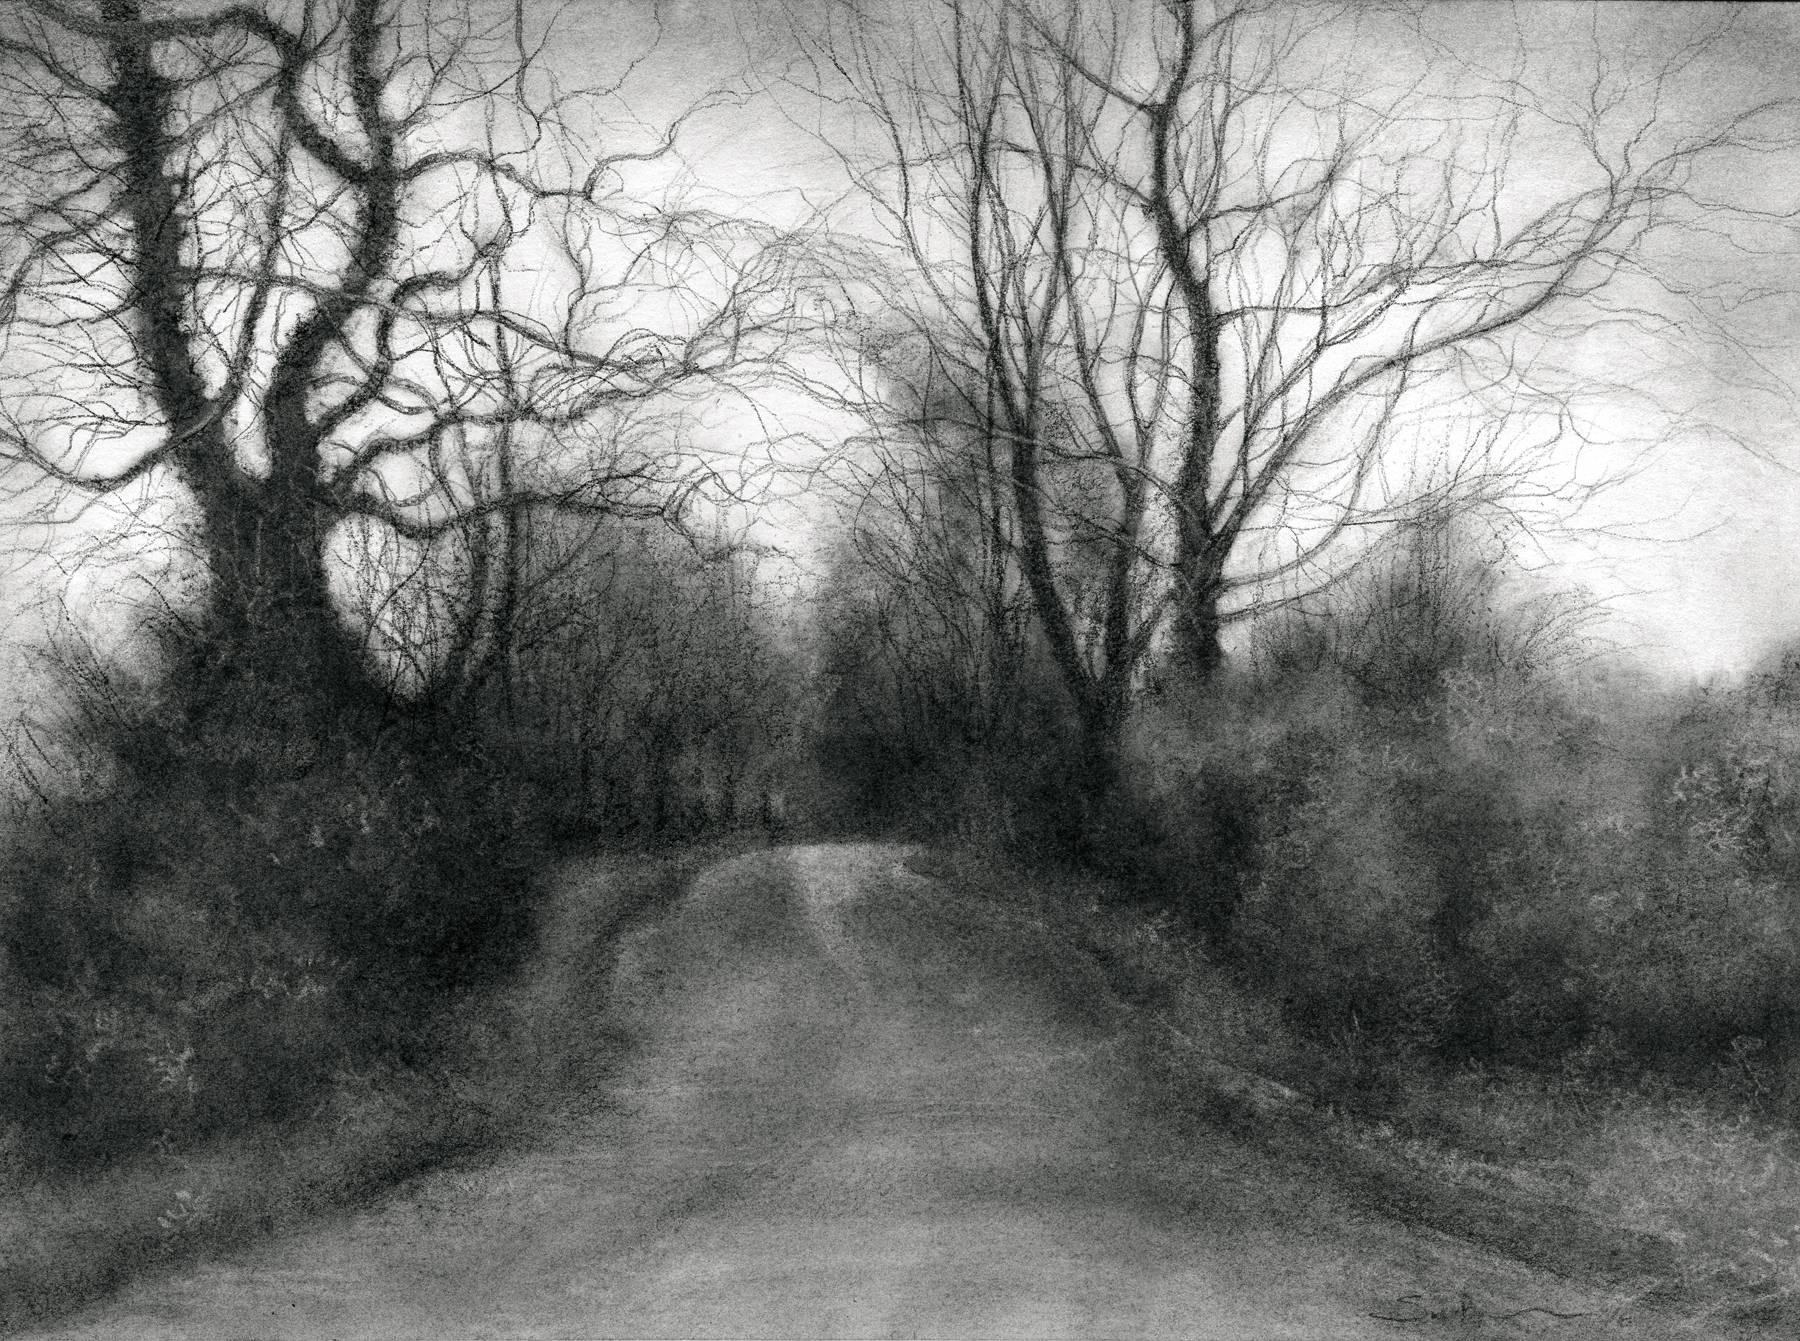 Rural Road 7 (Realistic Black & White Charcoal Drawing of Country Road & Trees) - Art by Sue Bryan